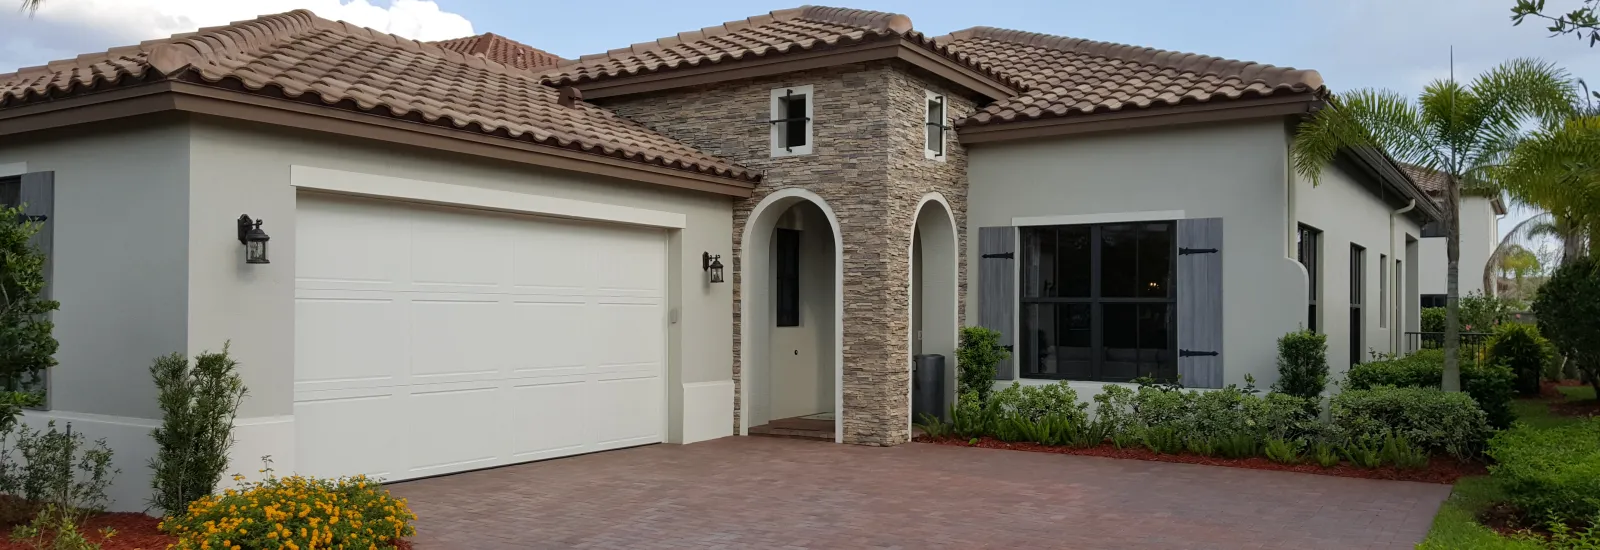 Pompano Beach Roofing Services